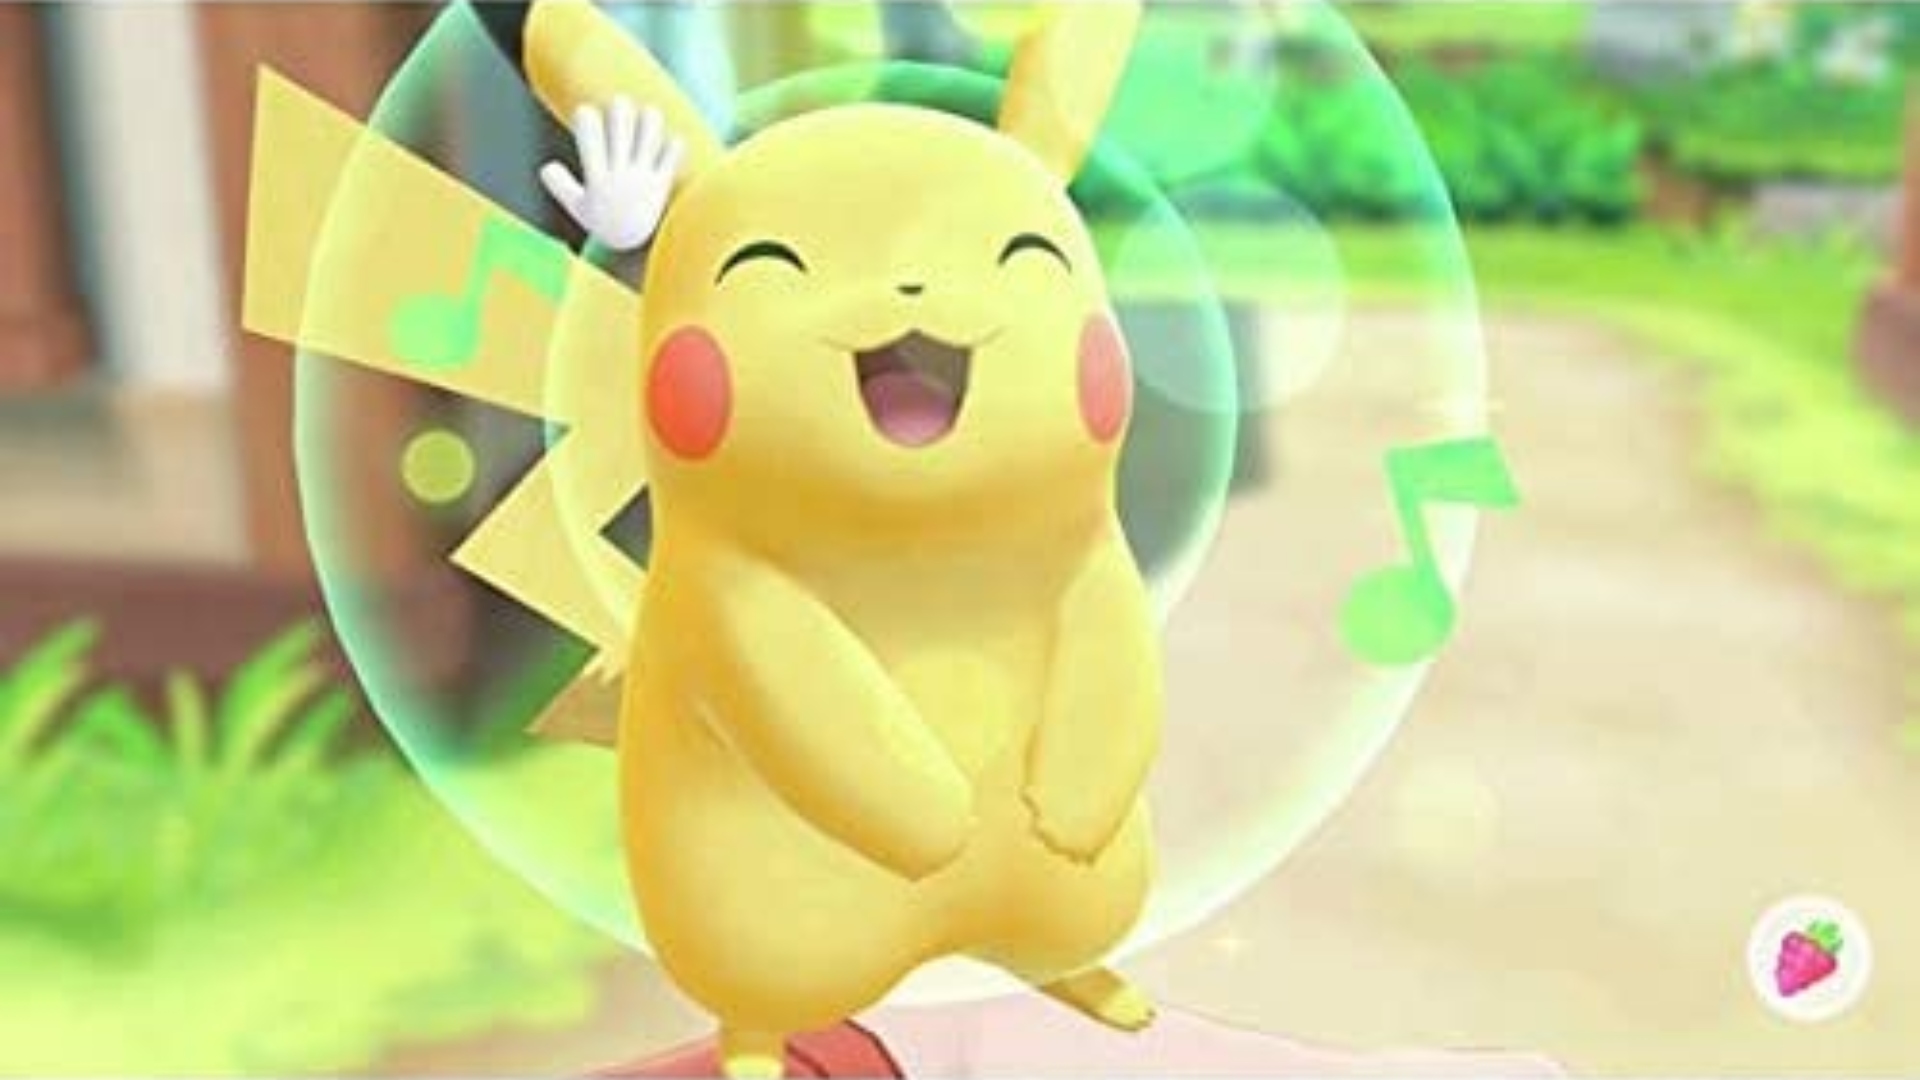 Pikachu looking very happy as its trainer pats its head on a dirt road